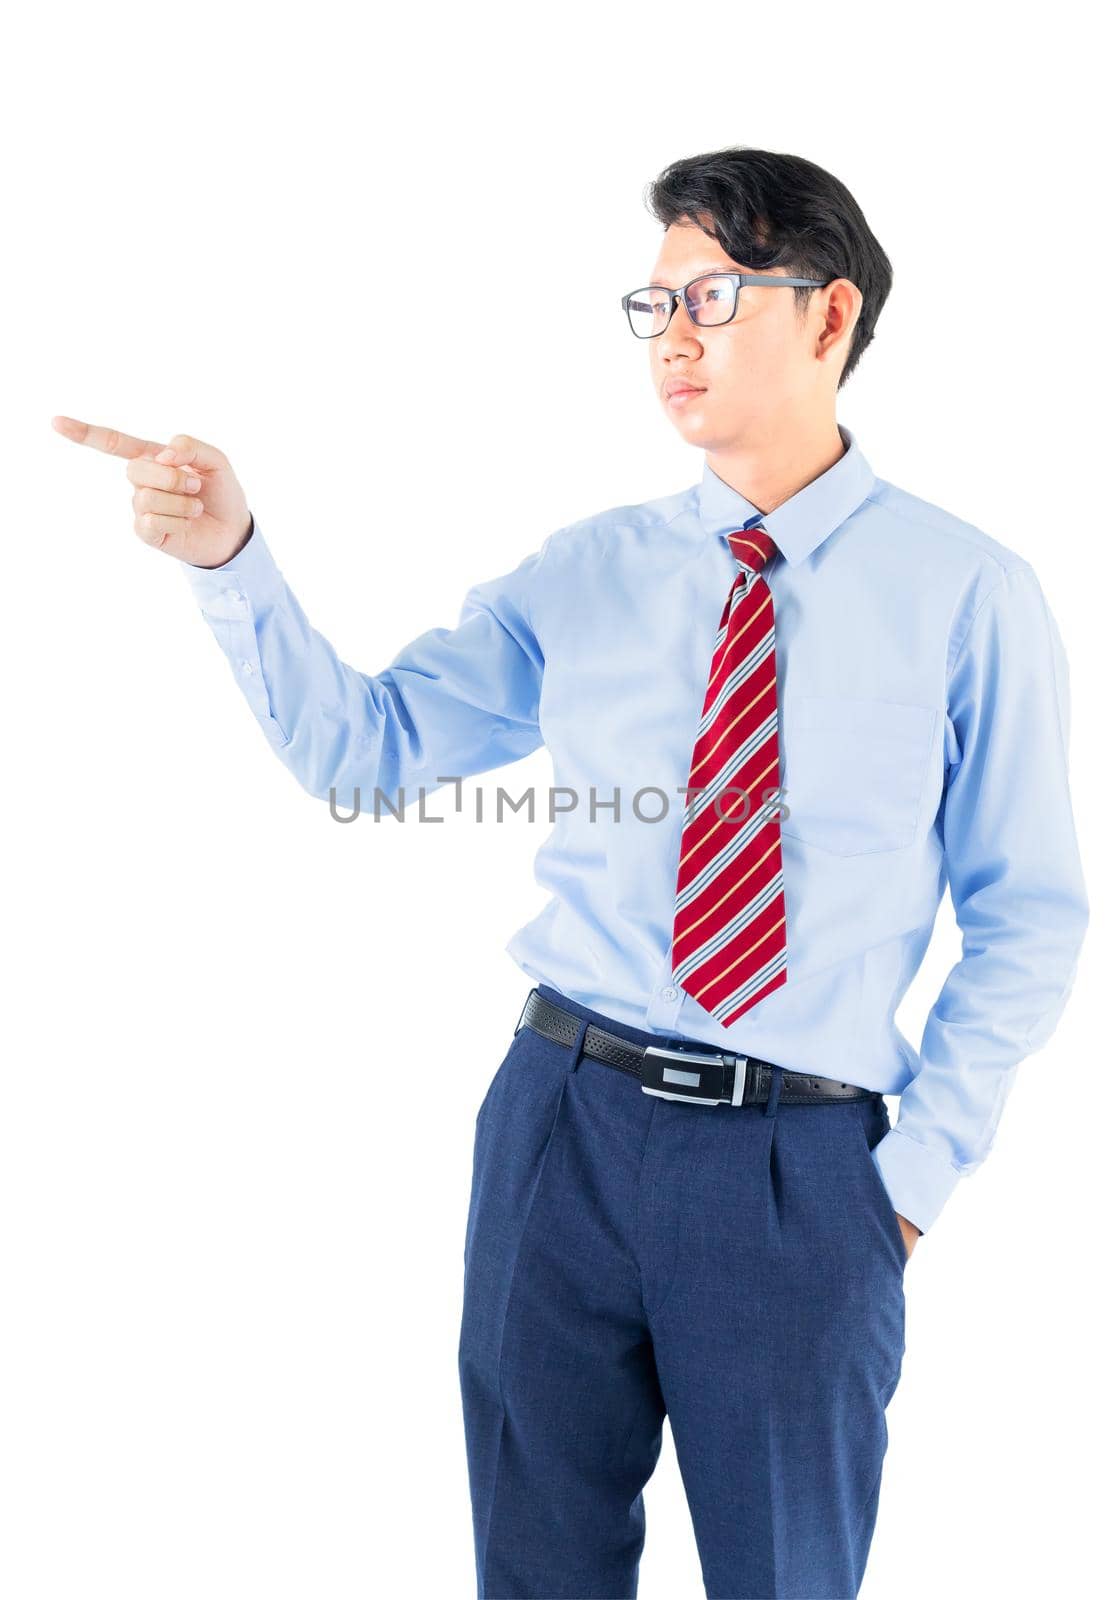 Male wearing blue shirt and red tie reaching posing in studio isolated on white background with clipping path